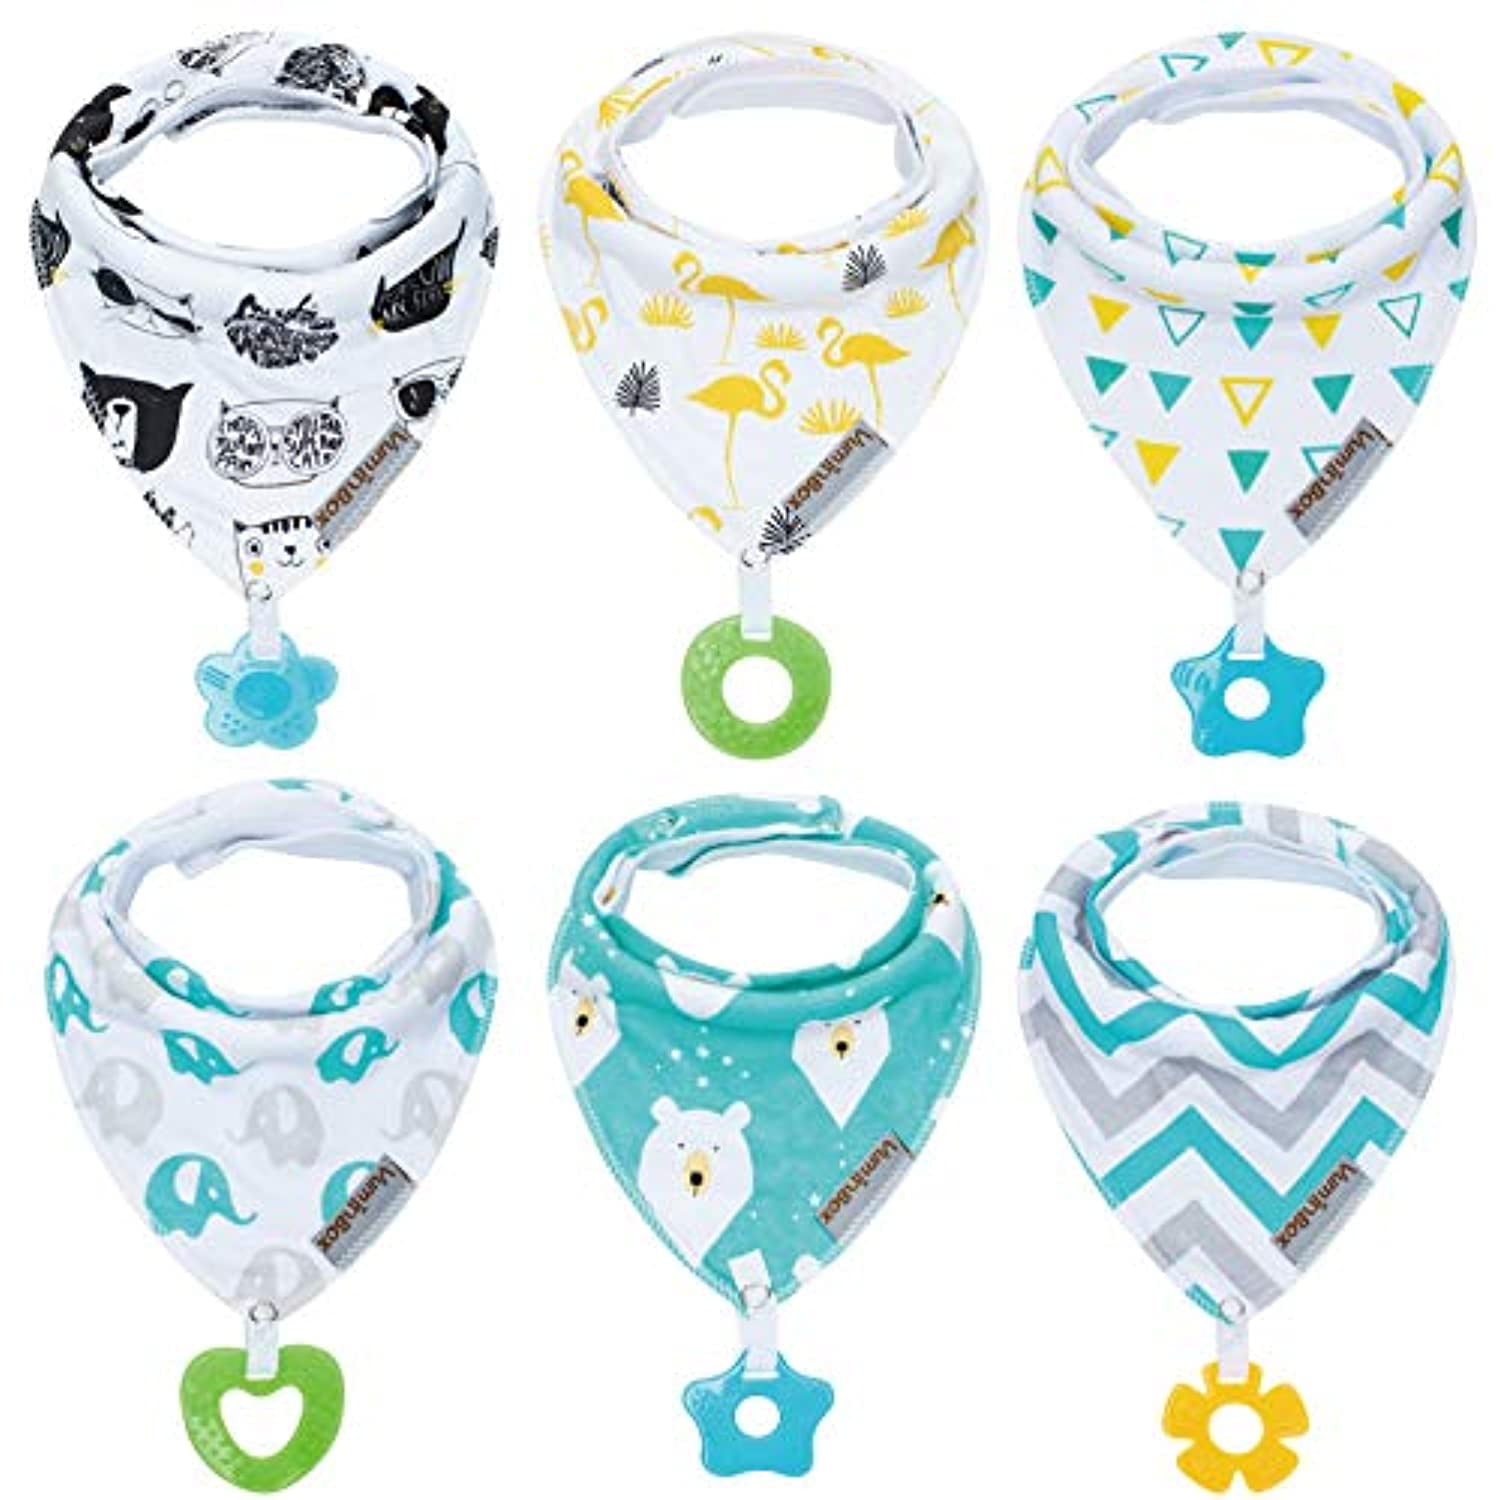 Baby Bandana Drool Bibs 6-pack Unisex Cotton Gift Set for Teething Drooling #ur 